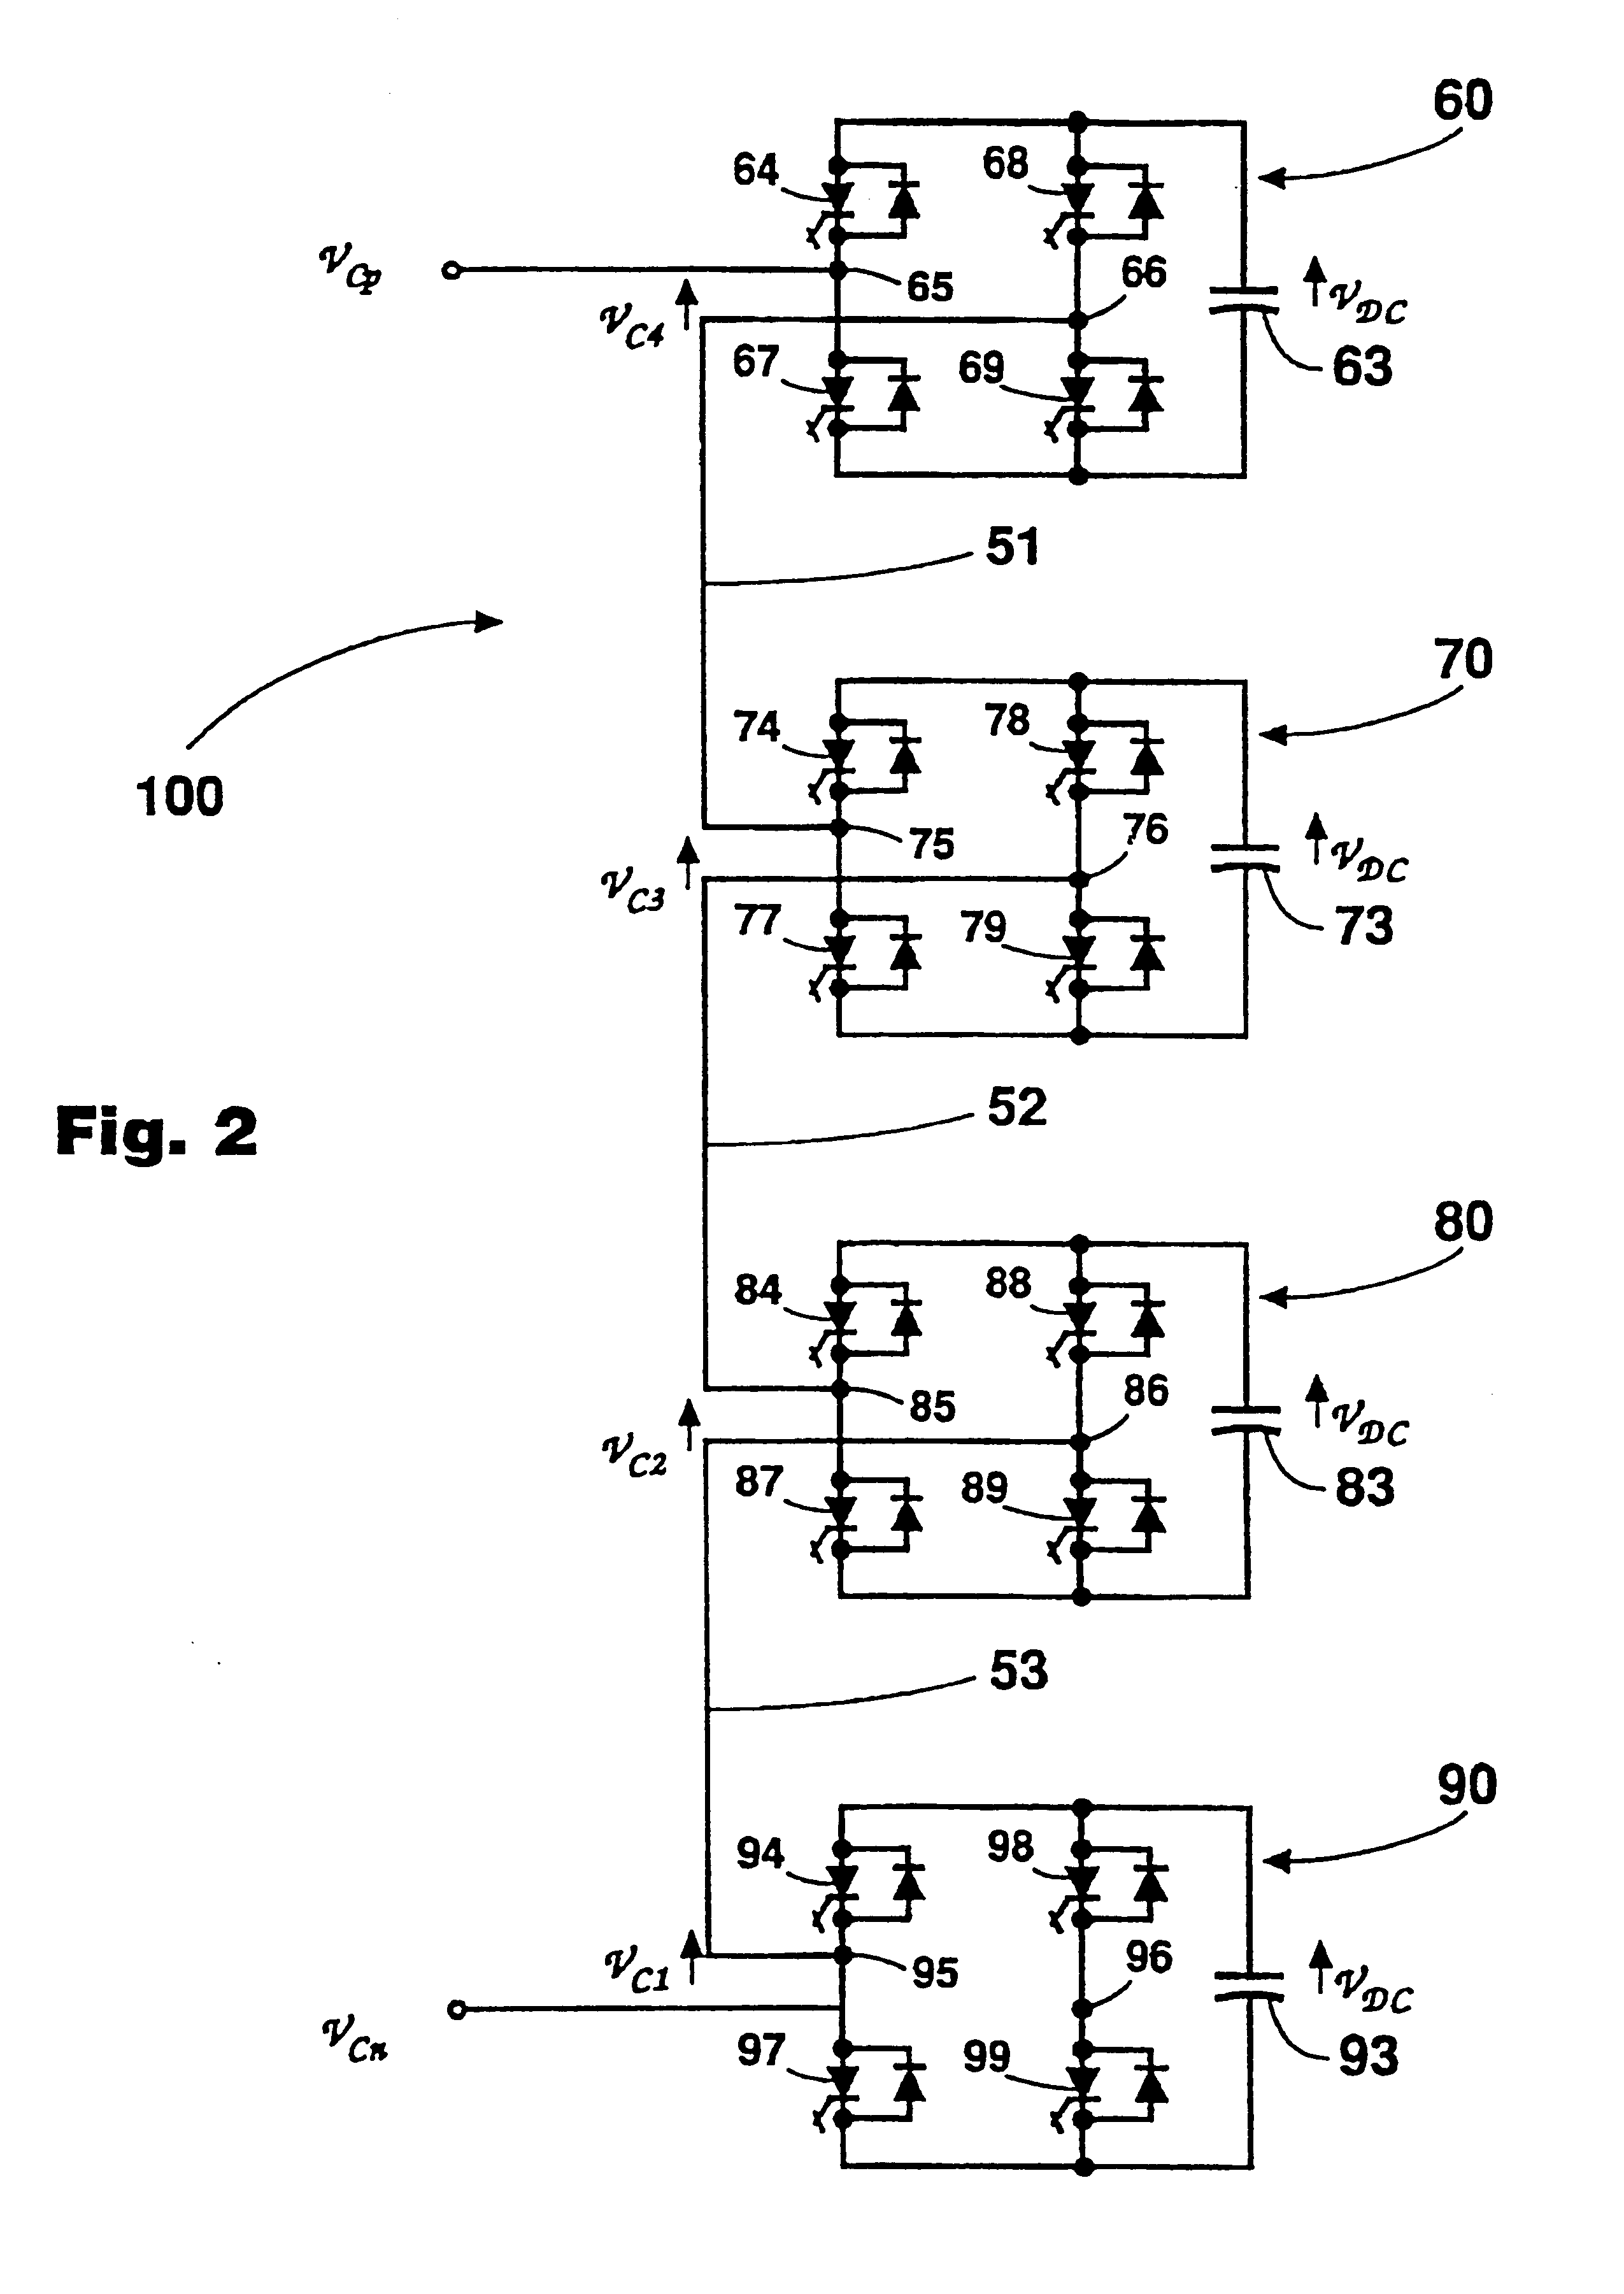 Multilevel cascade voltage source inverter with seperate DC sources